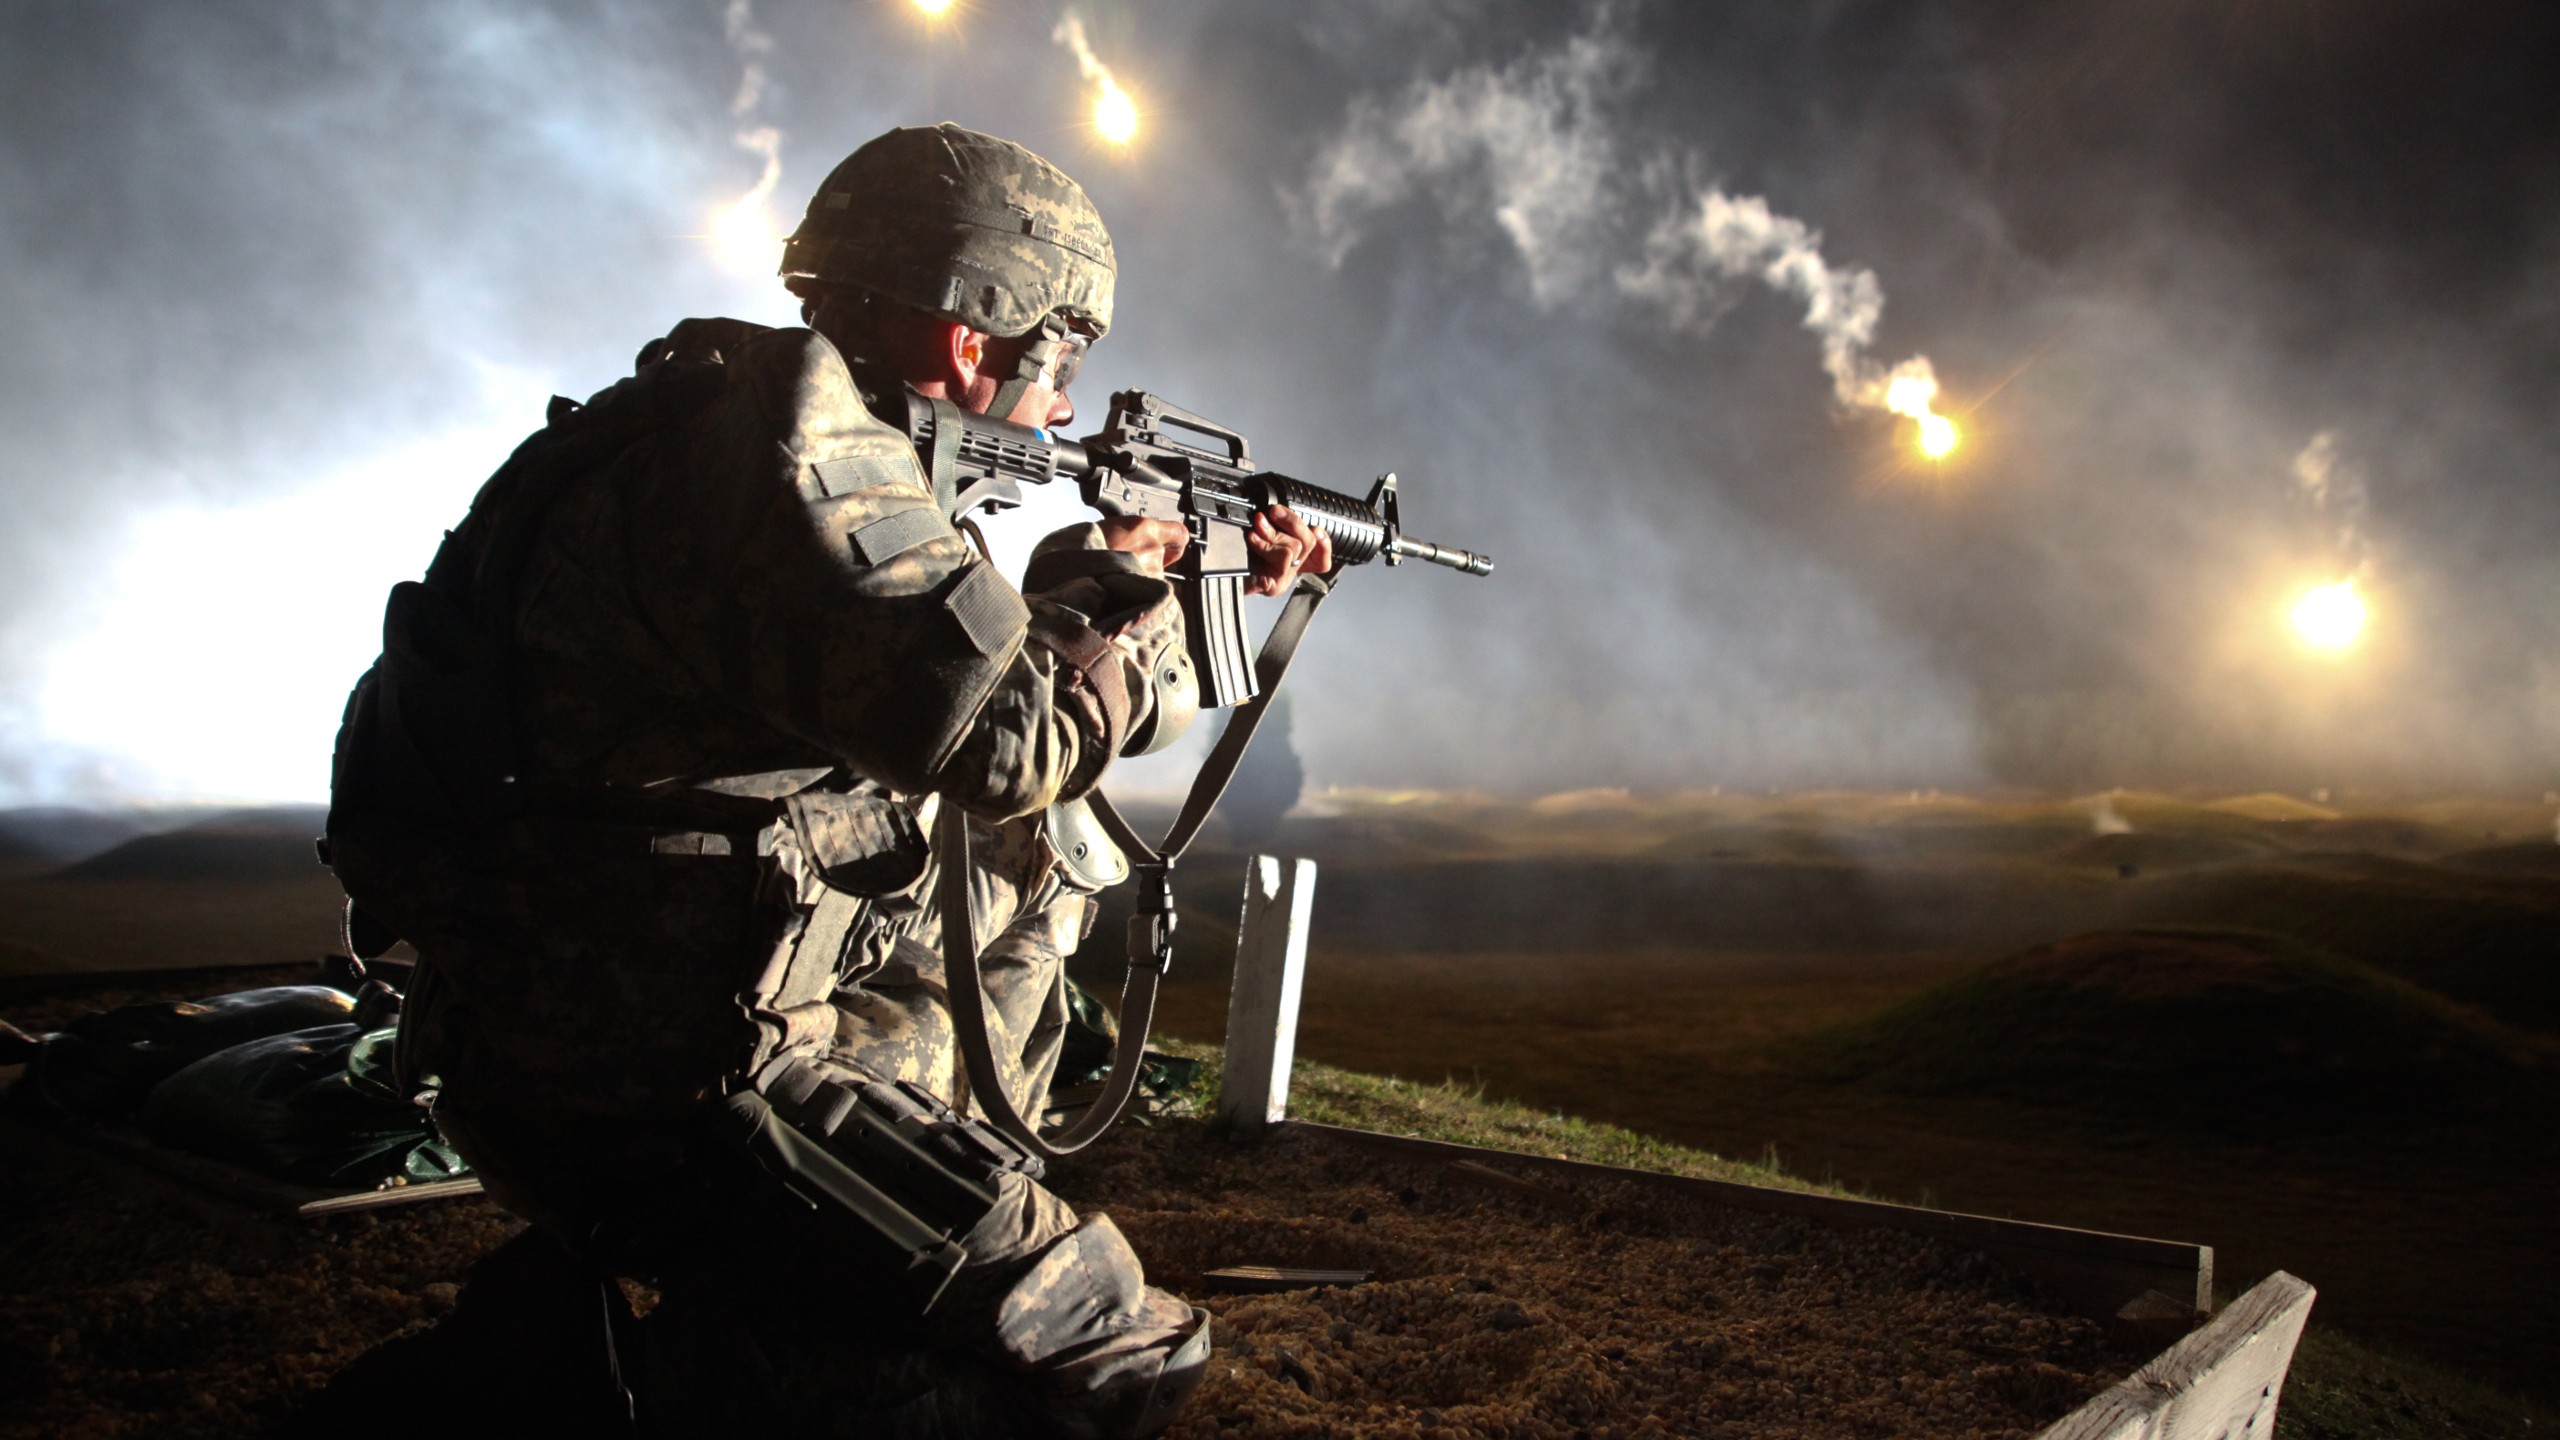 People 2560x1440 military flares United States Army night smoke soldier M4 weapon